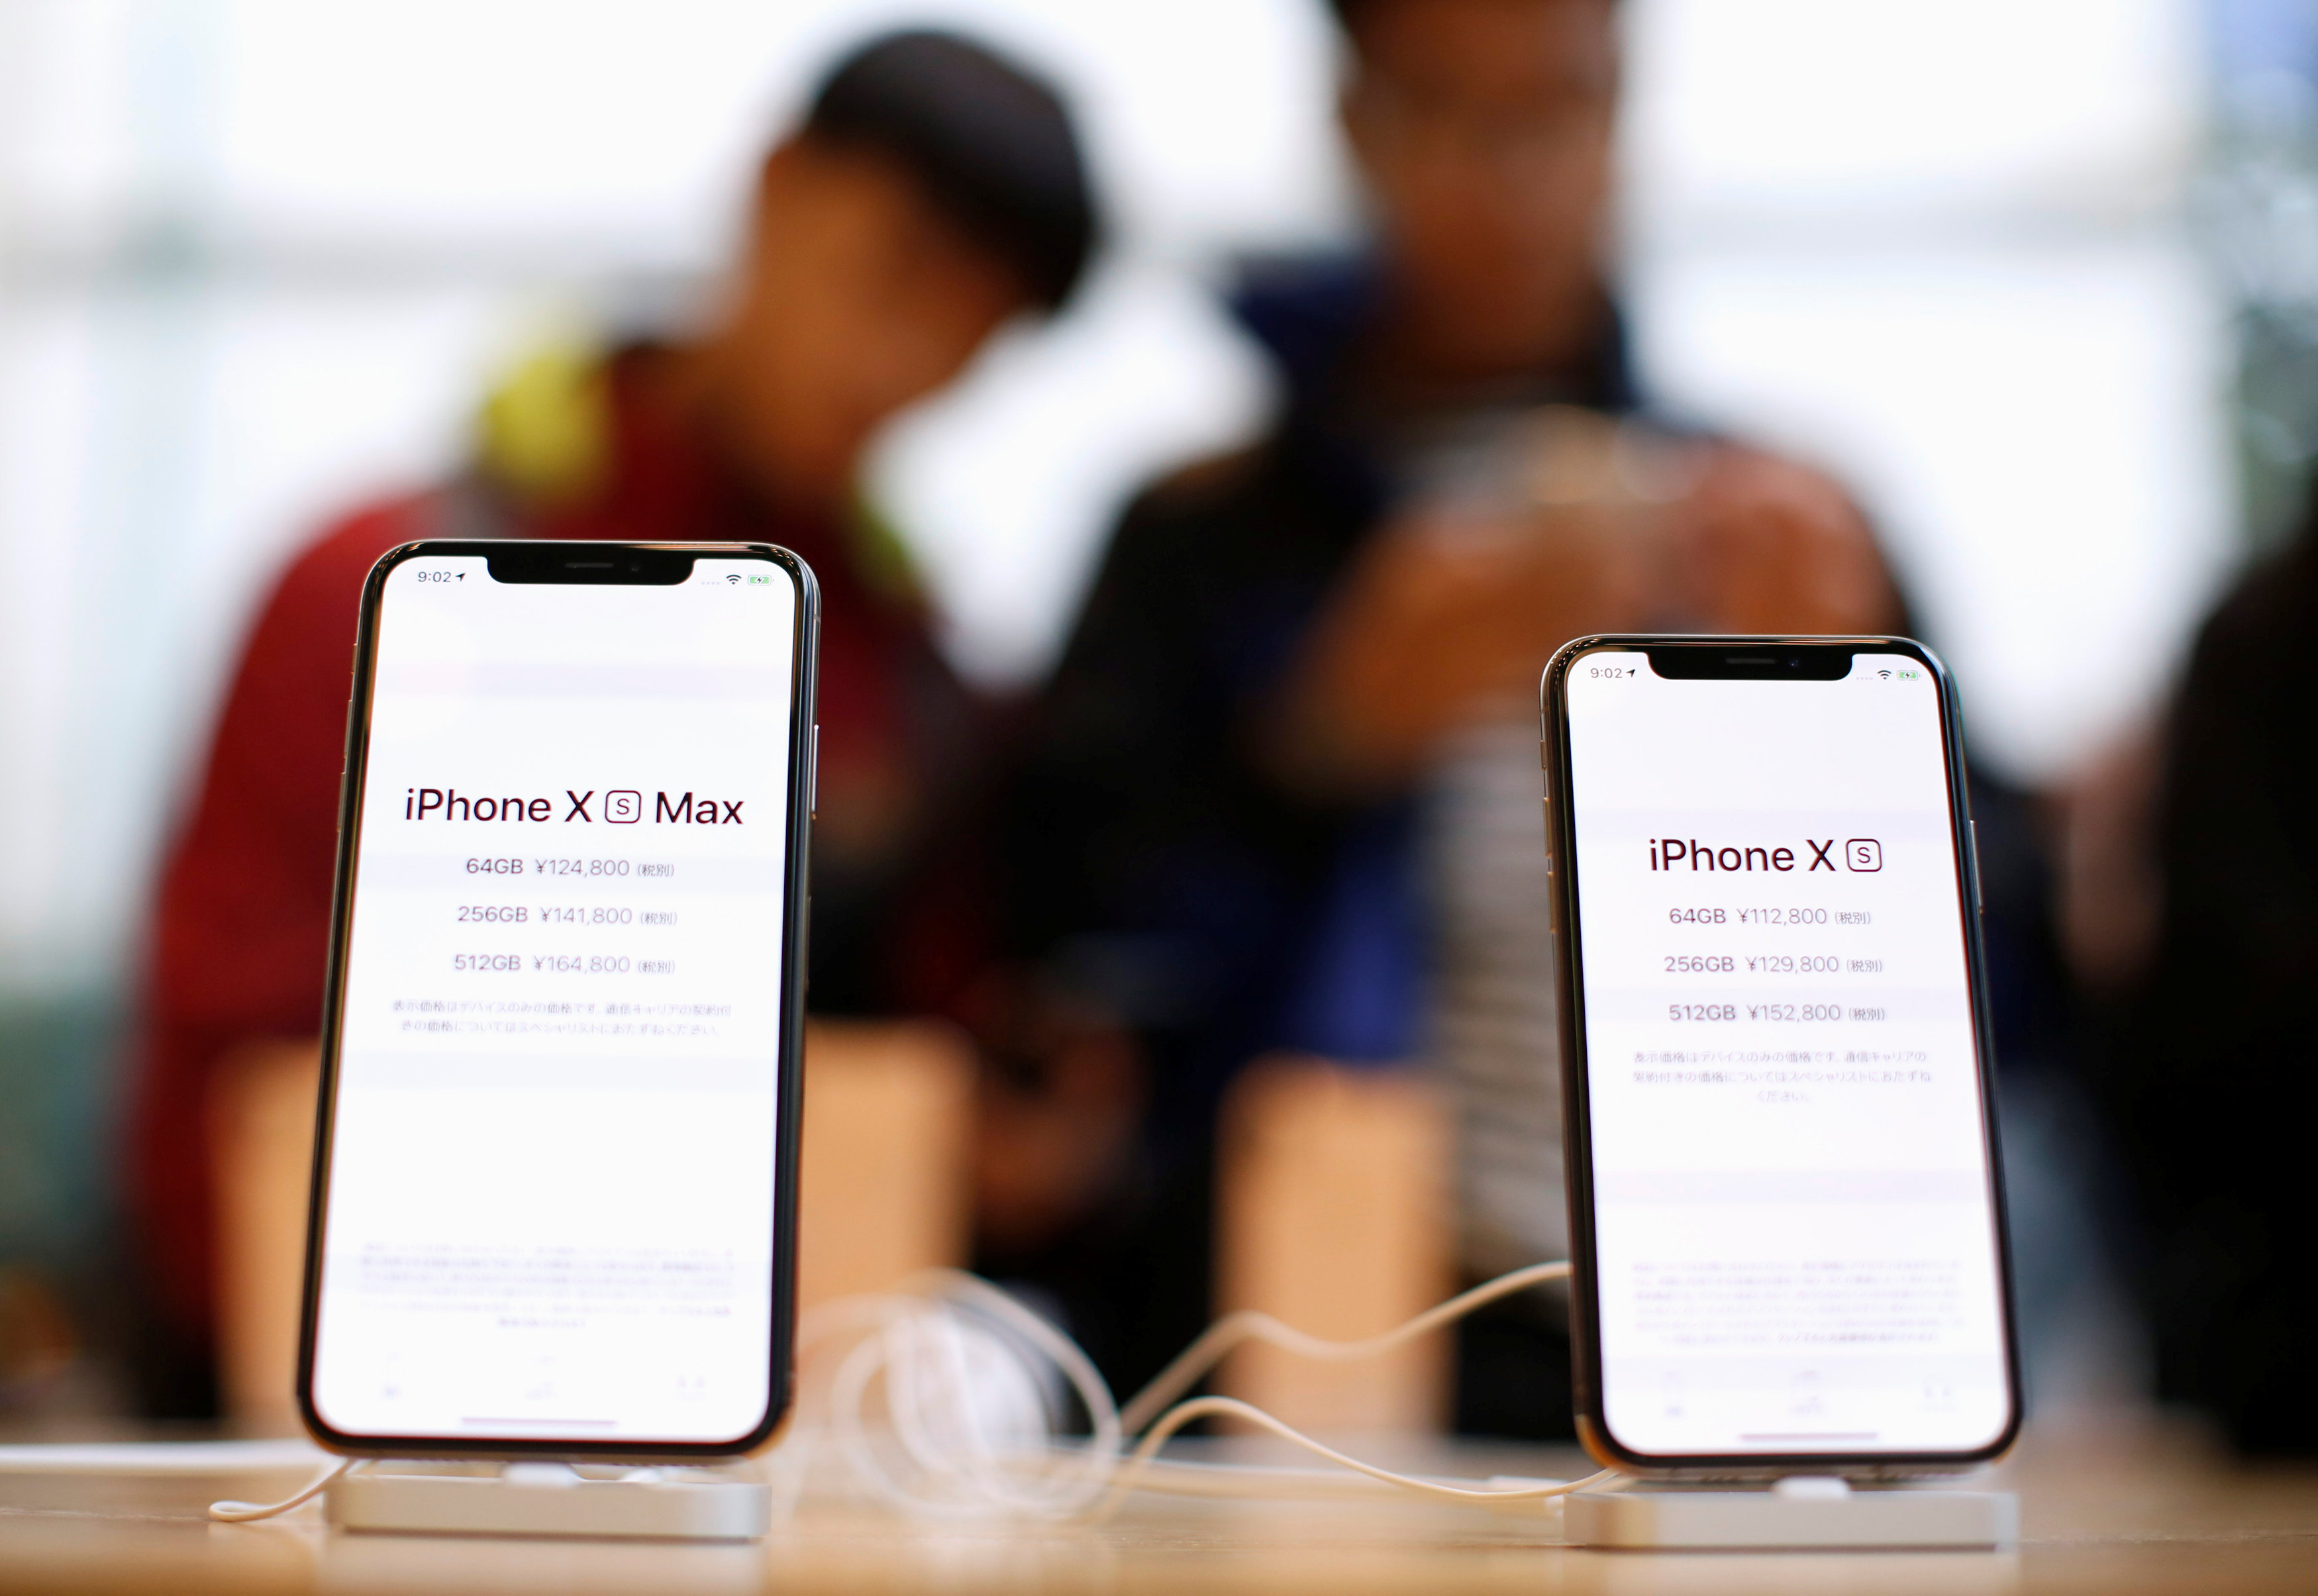 Apple's new iPhone XS and XS Max 